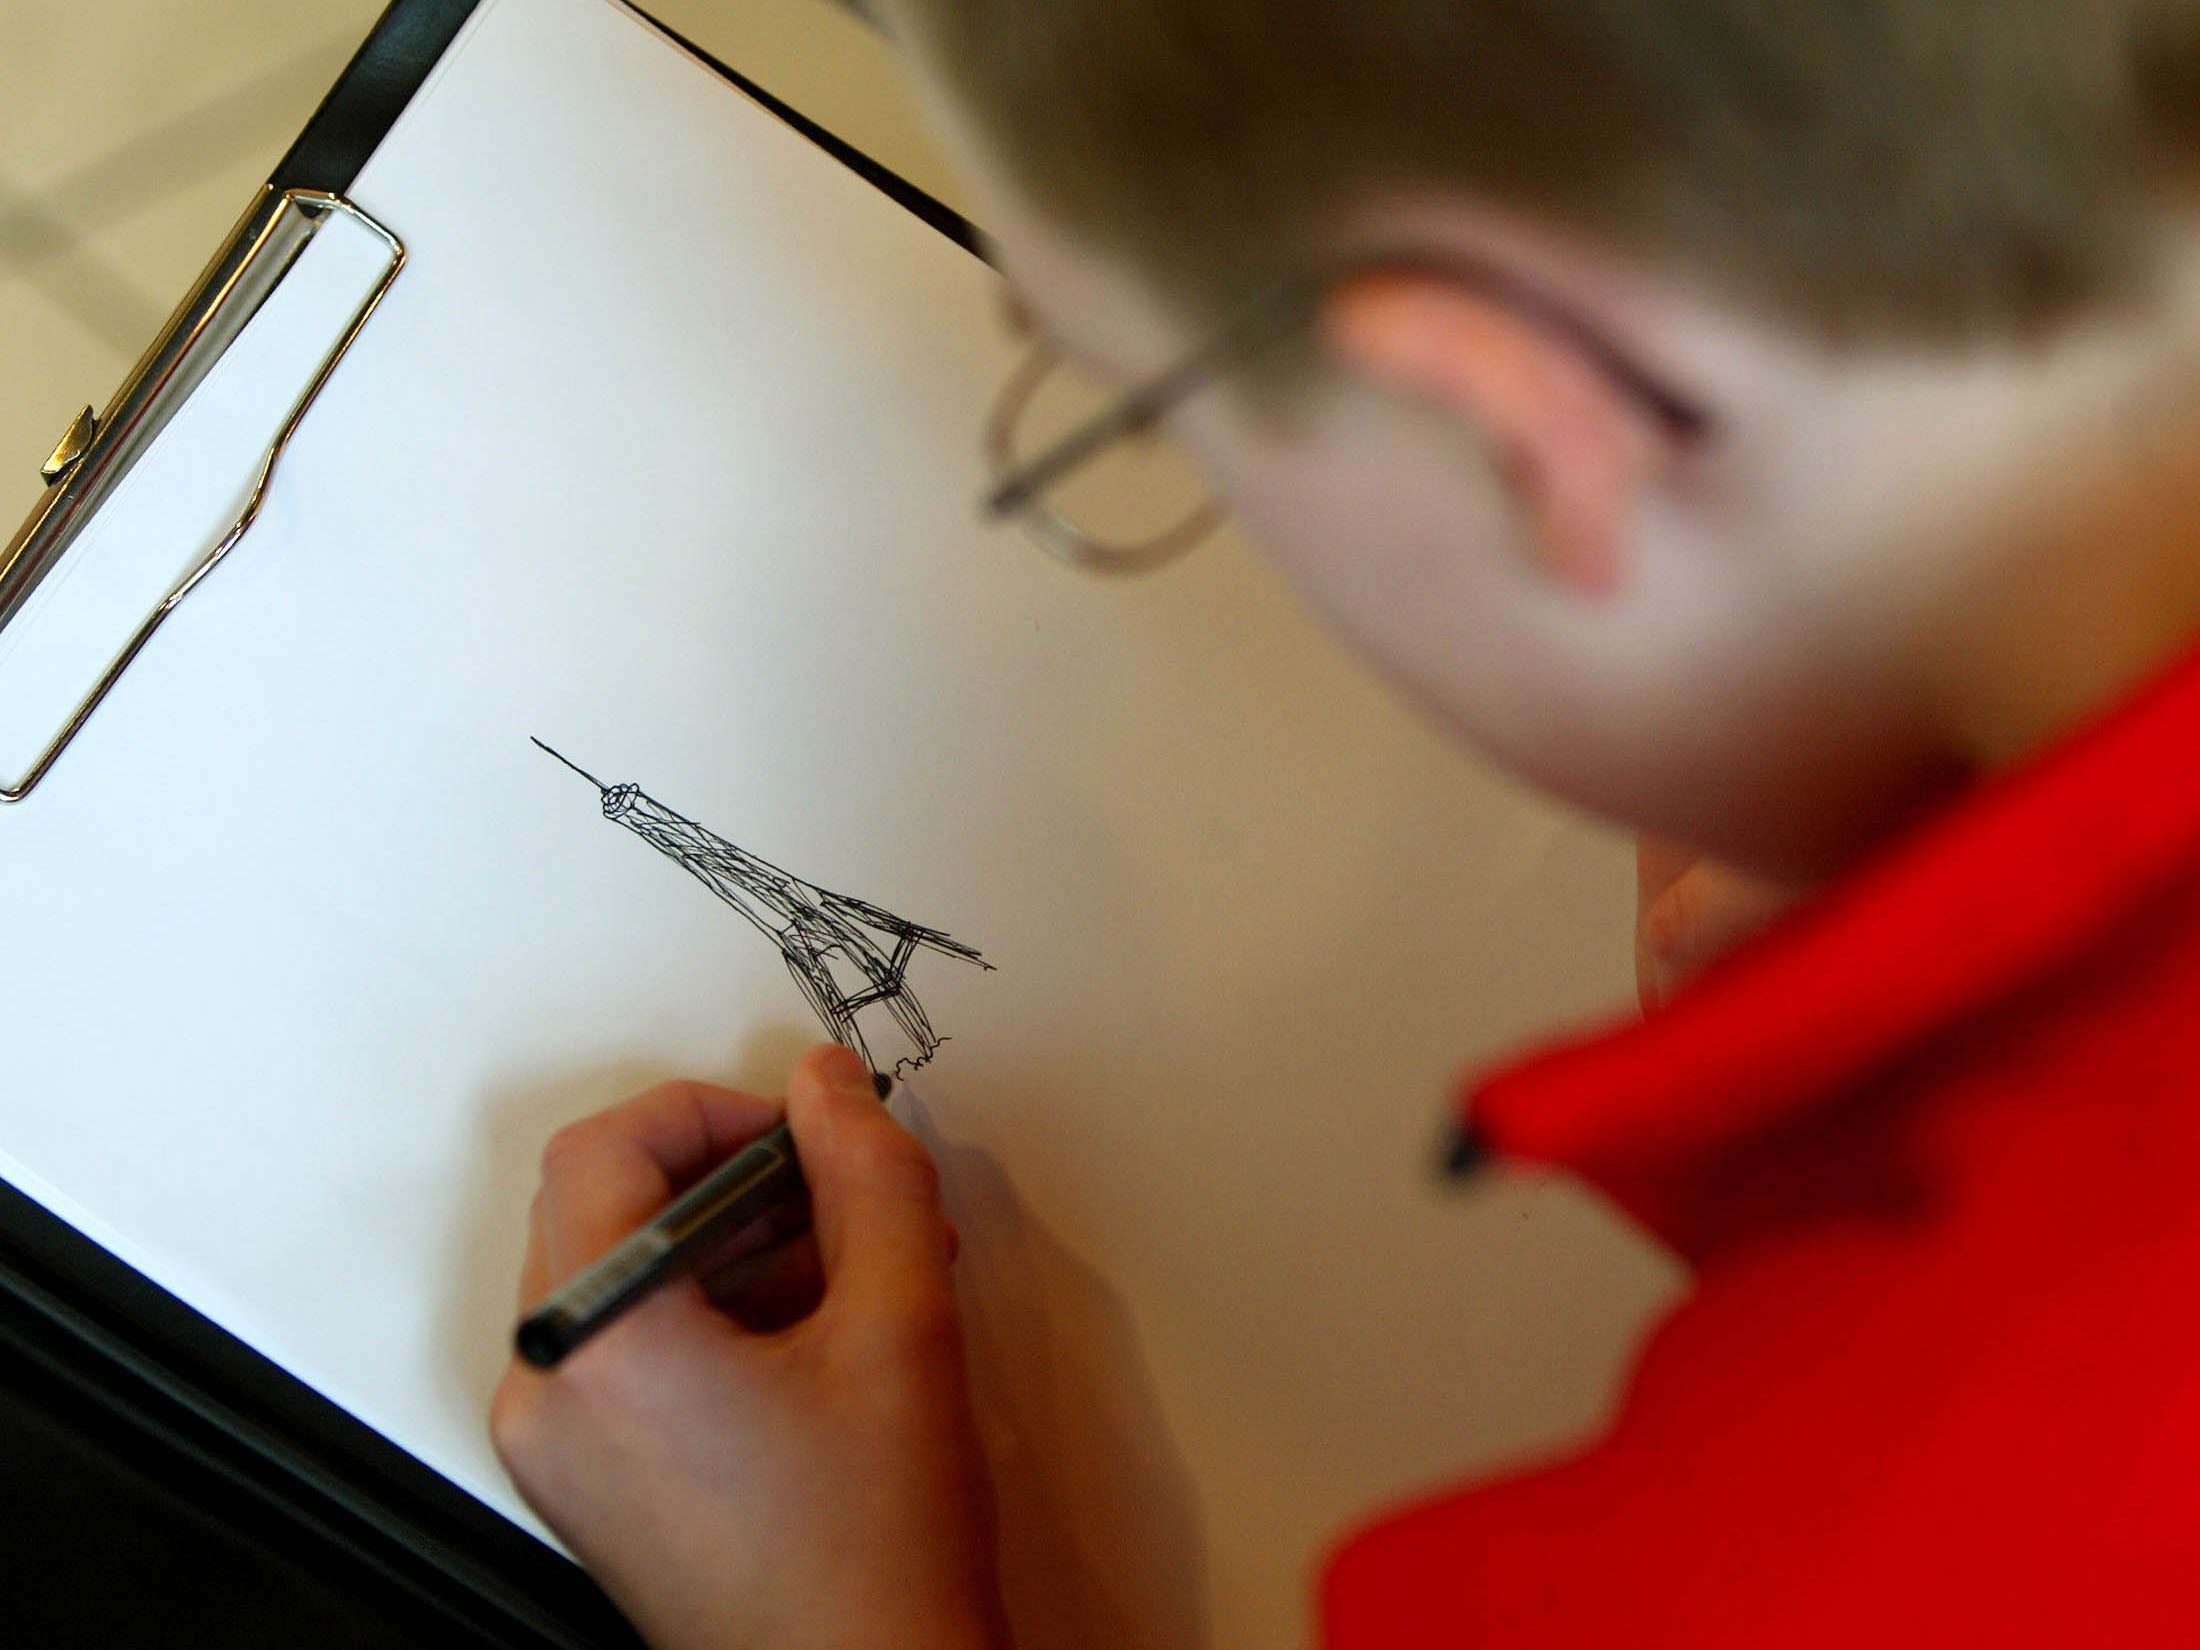 Test draws on doodles to spot signs of autism | Spectrum | Autism Research  News